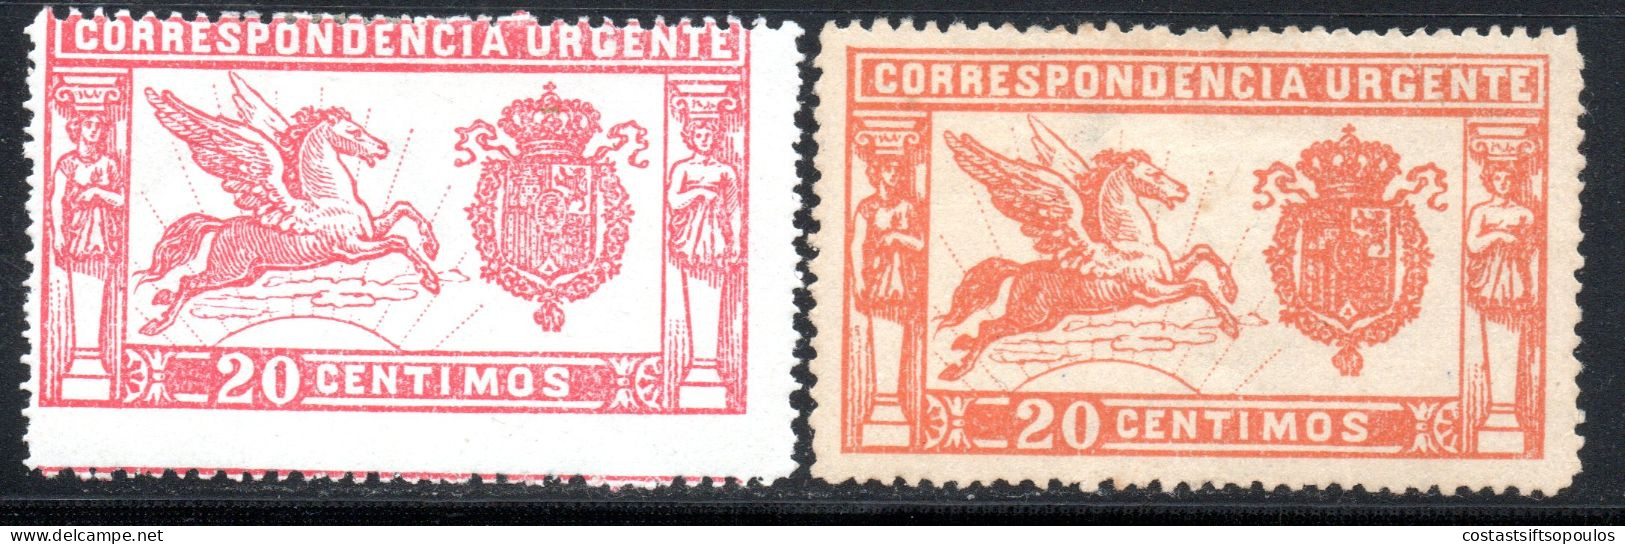 2155. SPAIN 1905-1925 SPECIAL DELIVERY #1 PEGASUS X 2, SHADES, MH. - Expres